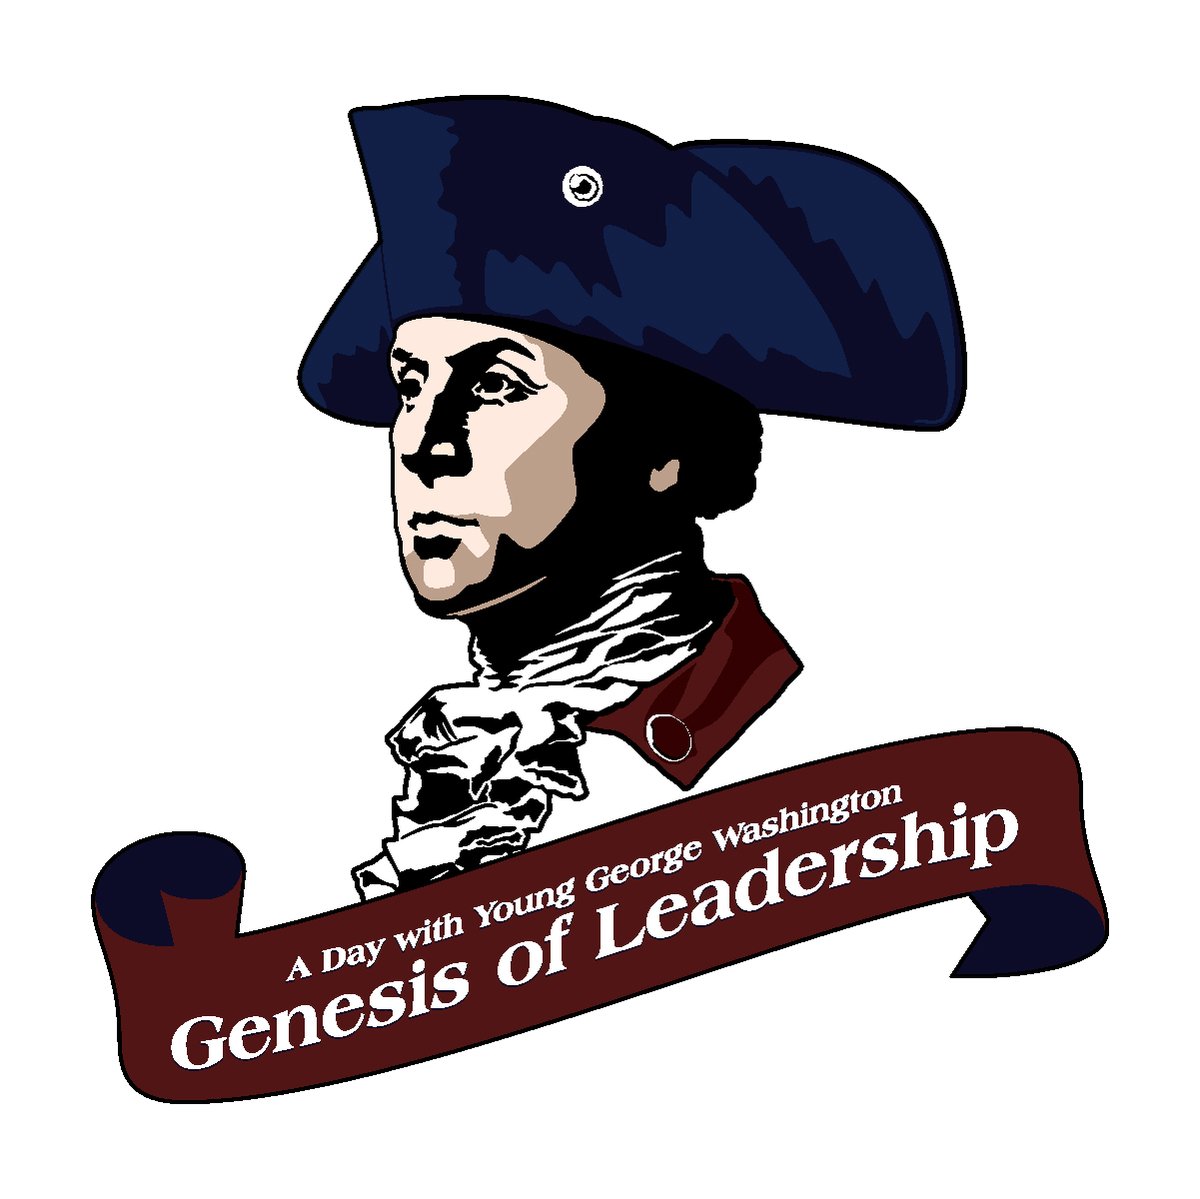 The US Army Heritage and Education Center in partnership with Fort Ligonier are excited to announce a leadership seminar this June for a select group of young adults with the theme of a young George Washington! fortligonier.org/event/fort-lig…